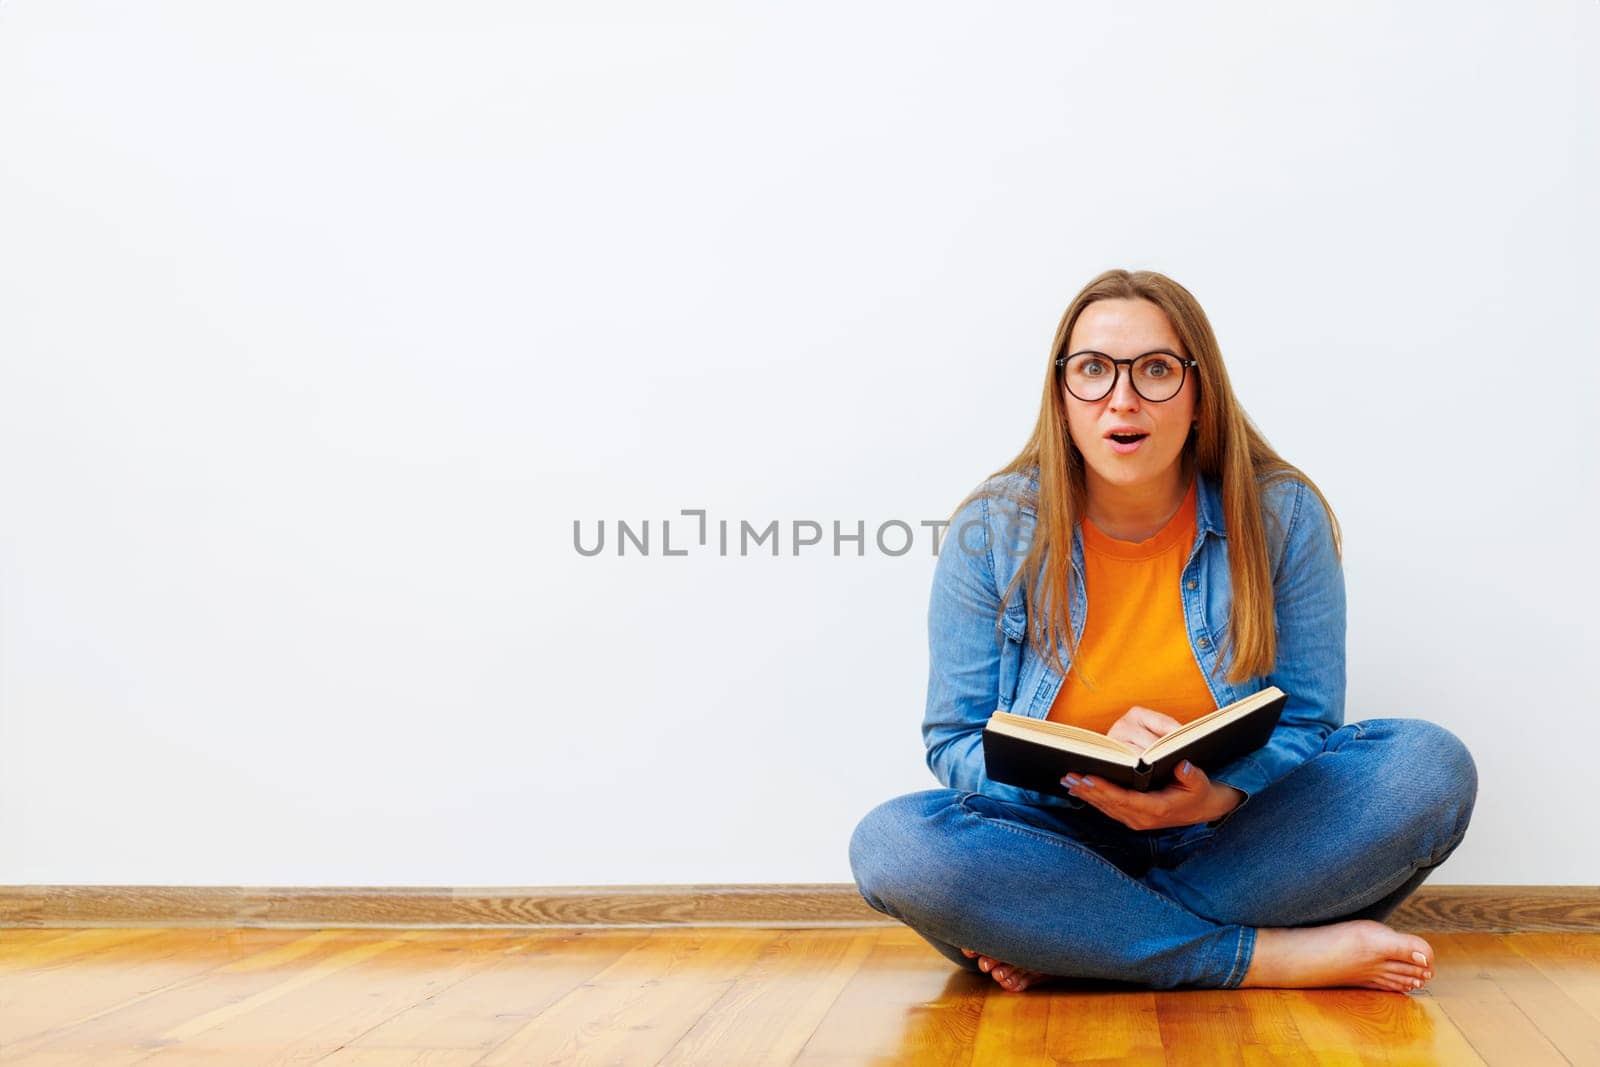 A surprised, positive young woman with glasses sits on the floor against a white wall holding a book